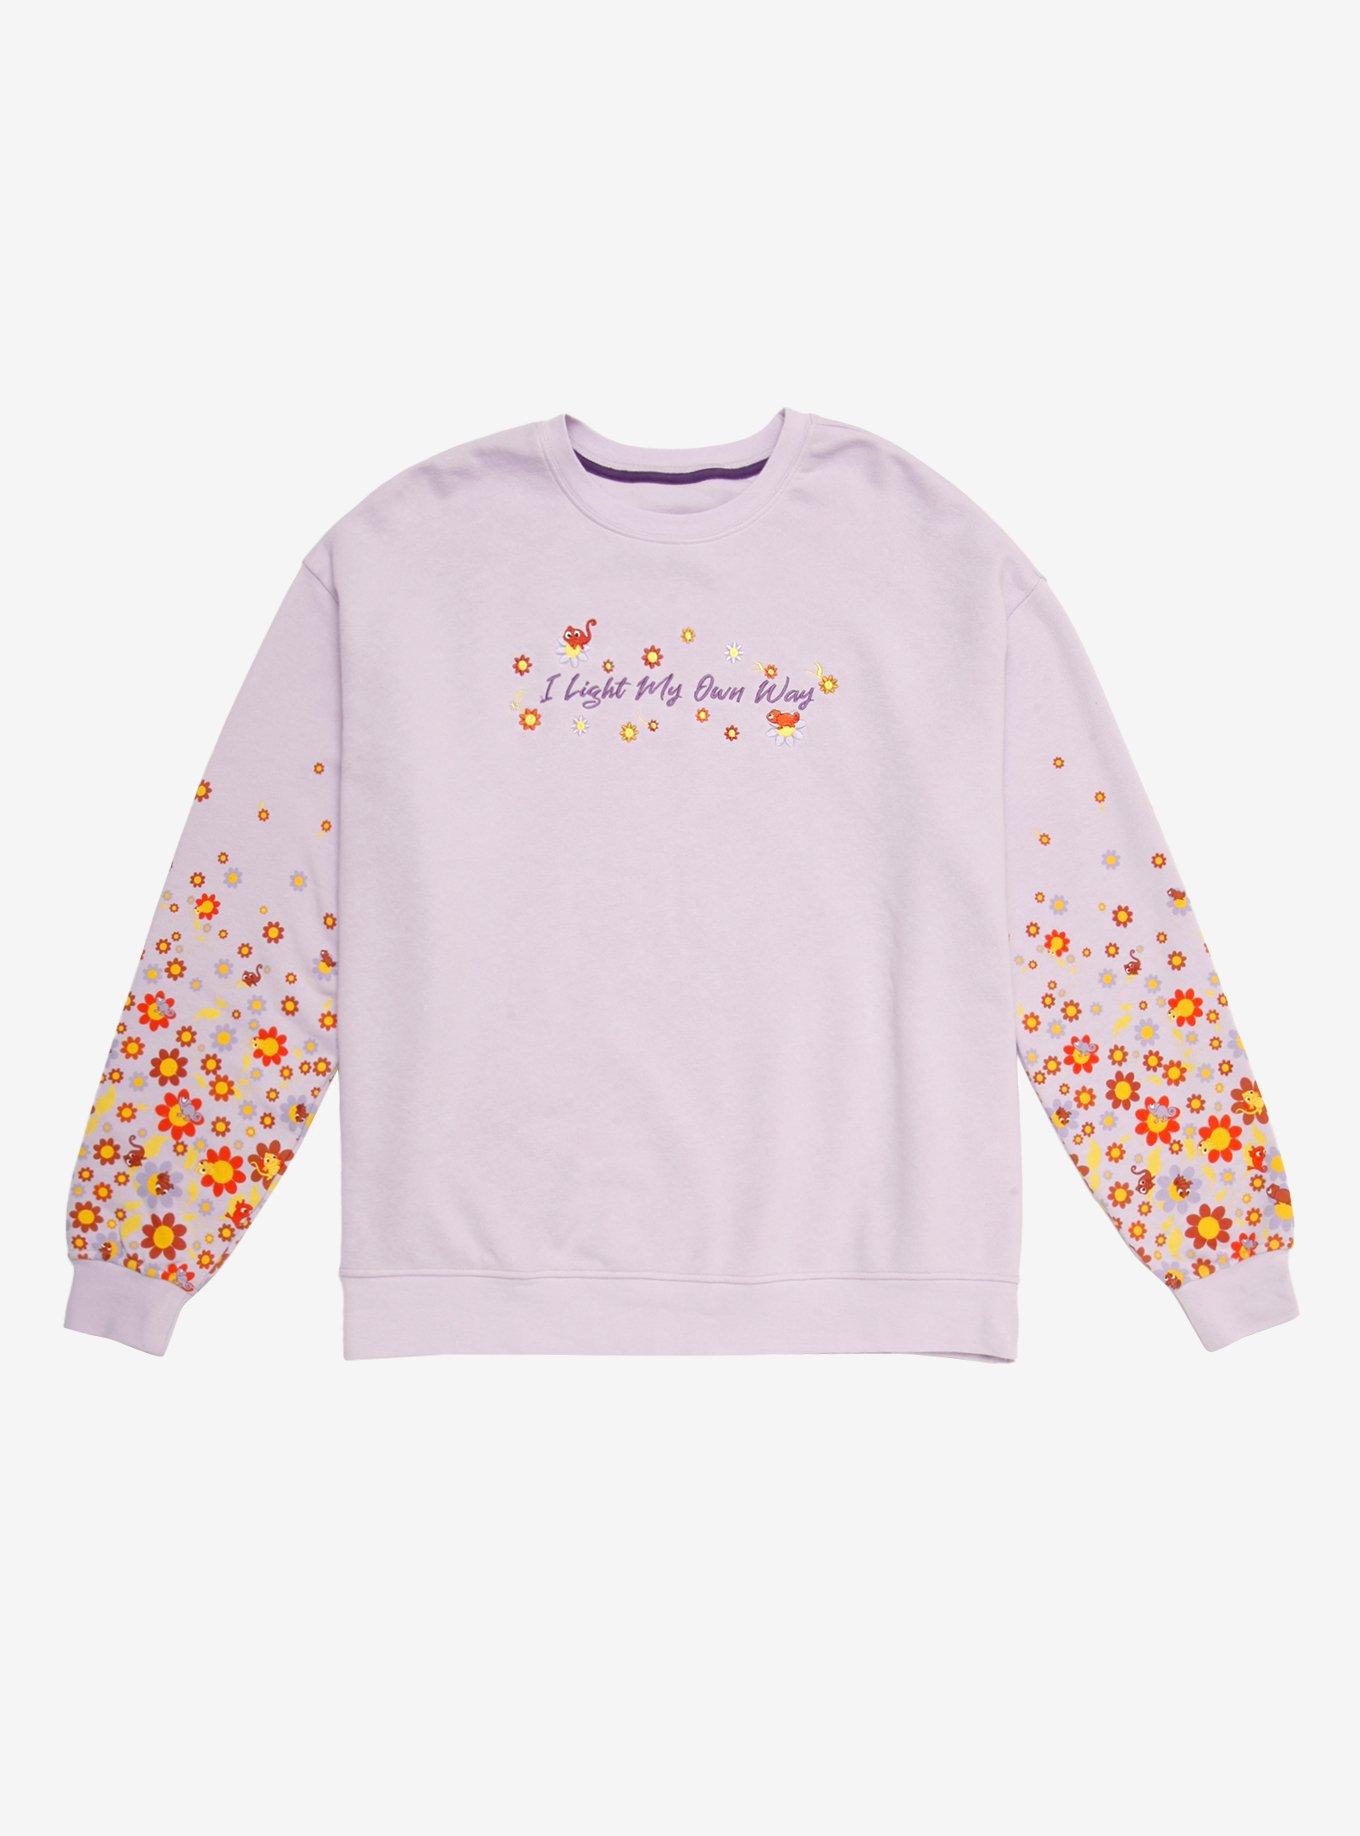 Our Universe Disney Tangled Light My Own Way Crewneck - BoxLunch Exclusive, LAVENDER, hi-res